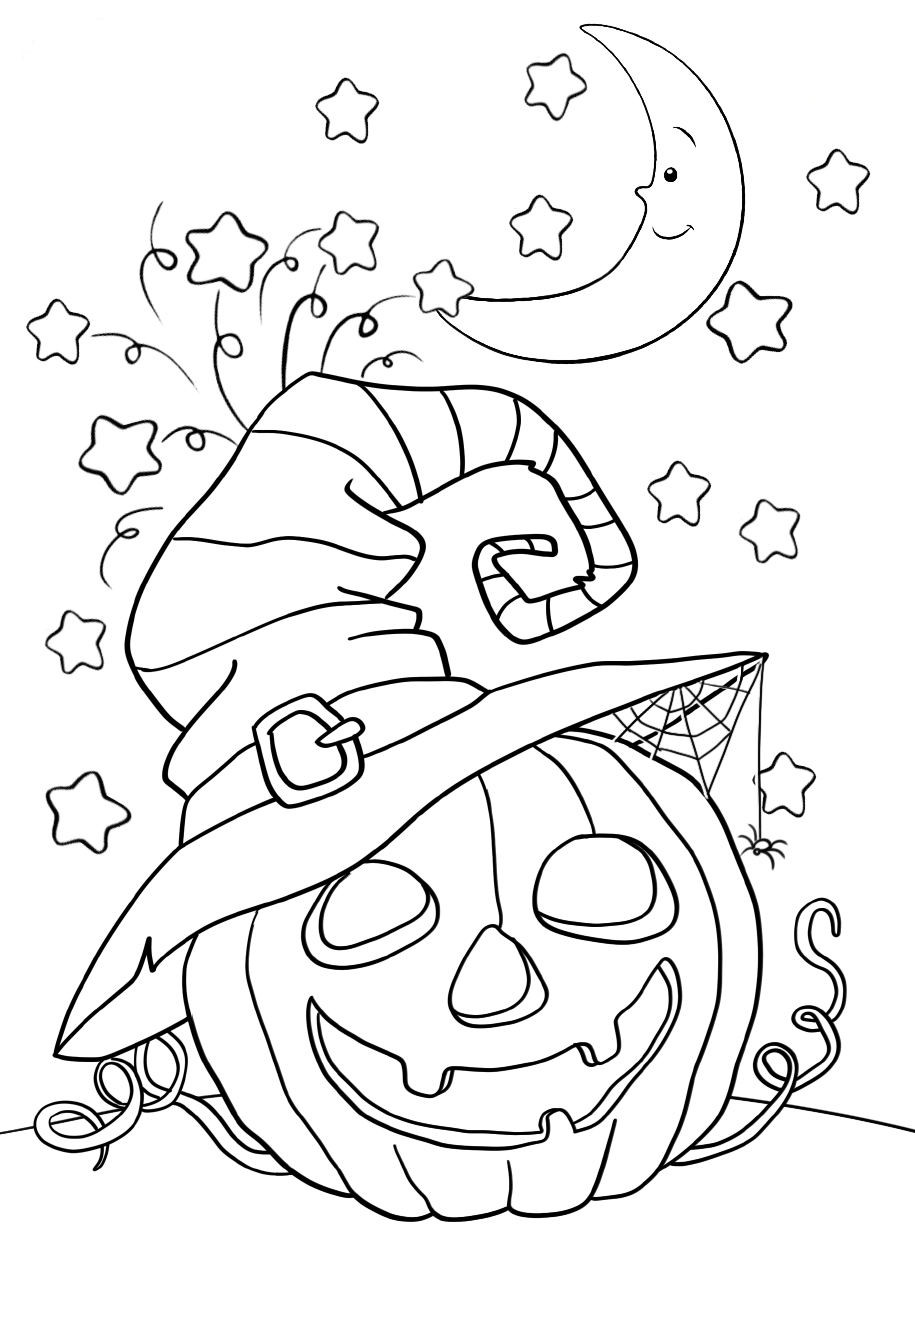 Halloween Coloring Contest | Envision Eye Health Clinic, Optometrists